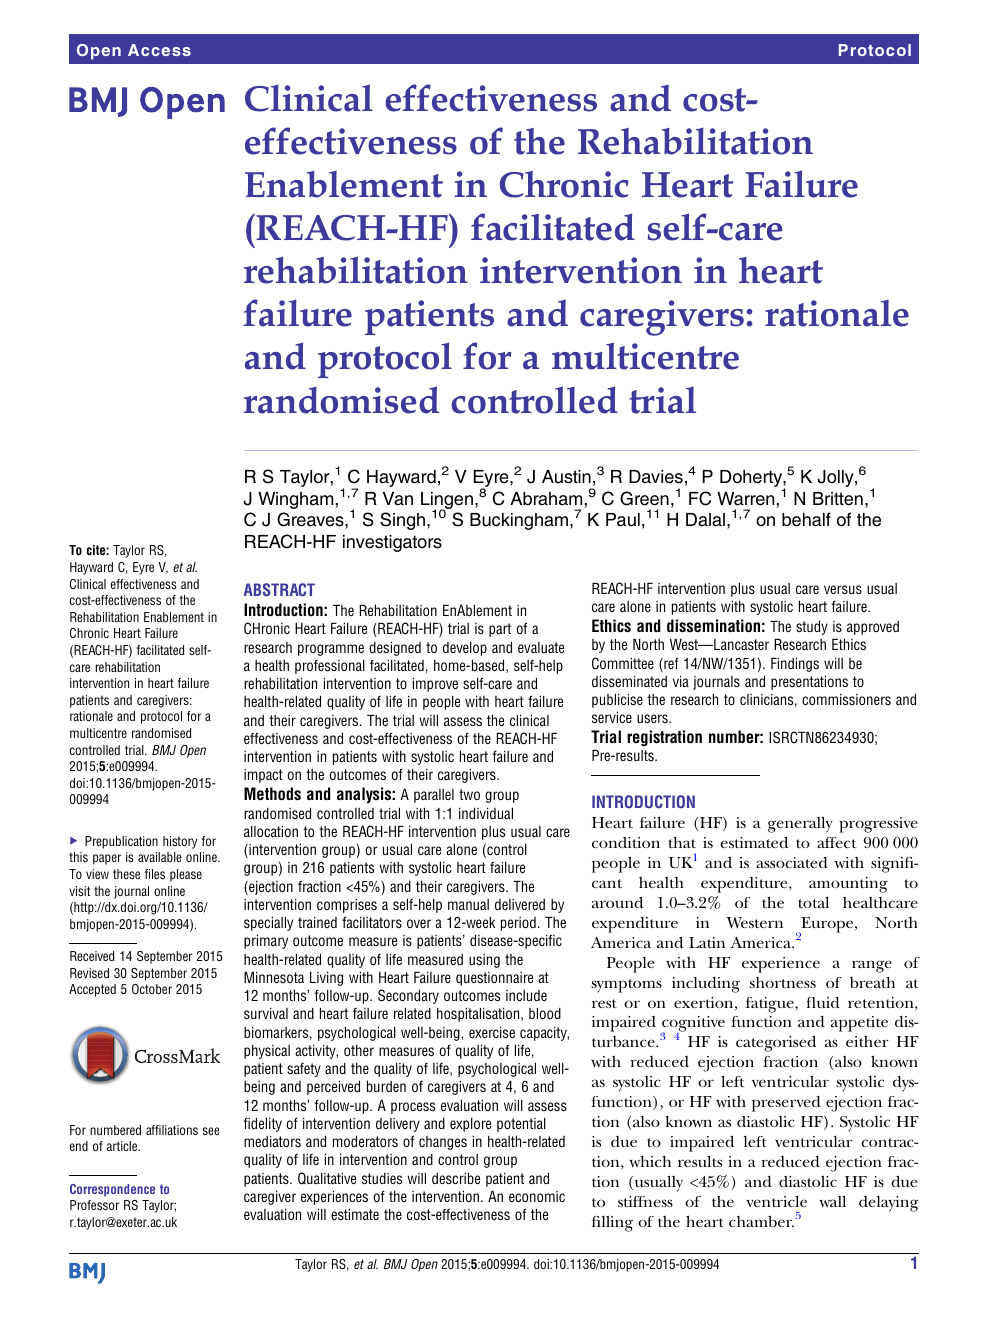 Clinical Effectiveness And Cost Effectiveness Of The Rehabilitation Enablement In Chronic Heart Failure Reach Hf Facilitated Self Care Rehabilitation Intervention In Heart Failure Patients And Caregivers Rationale And Protocol For A Multicentre